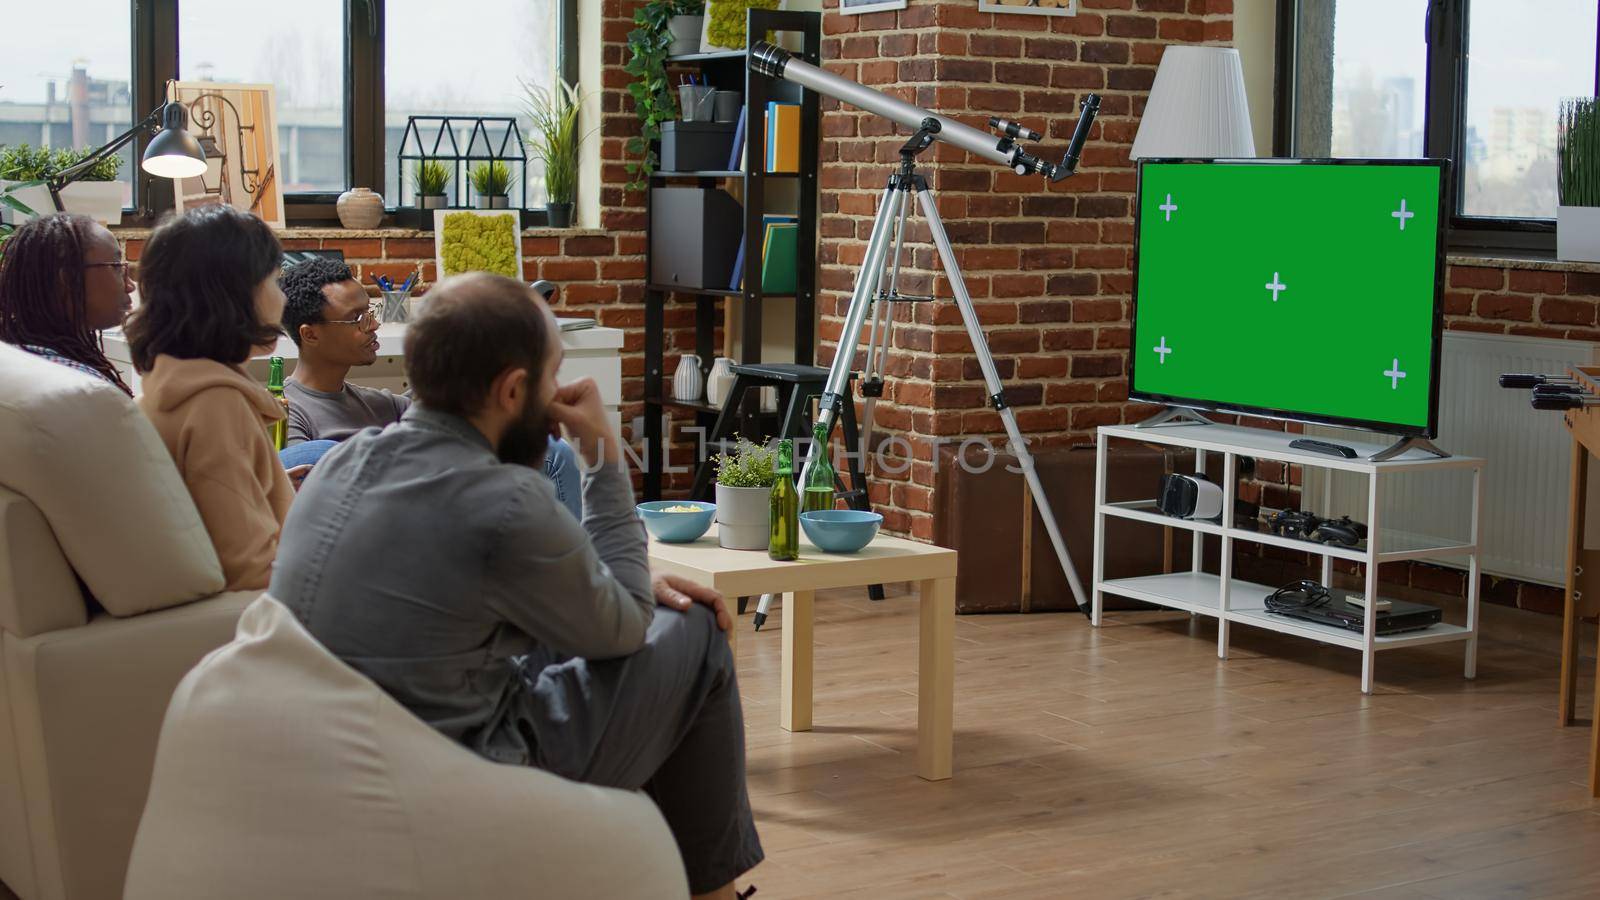 Men and women watching television with green screen in living room, using isolated chroma key template with mockup copy space and blank background. Modern technology on TV display. Tripod shot.